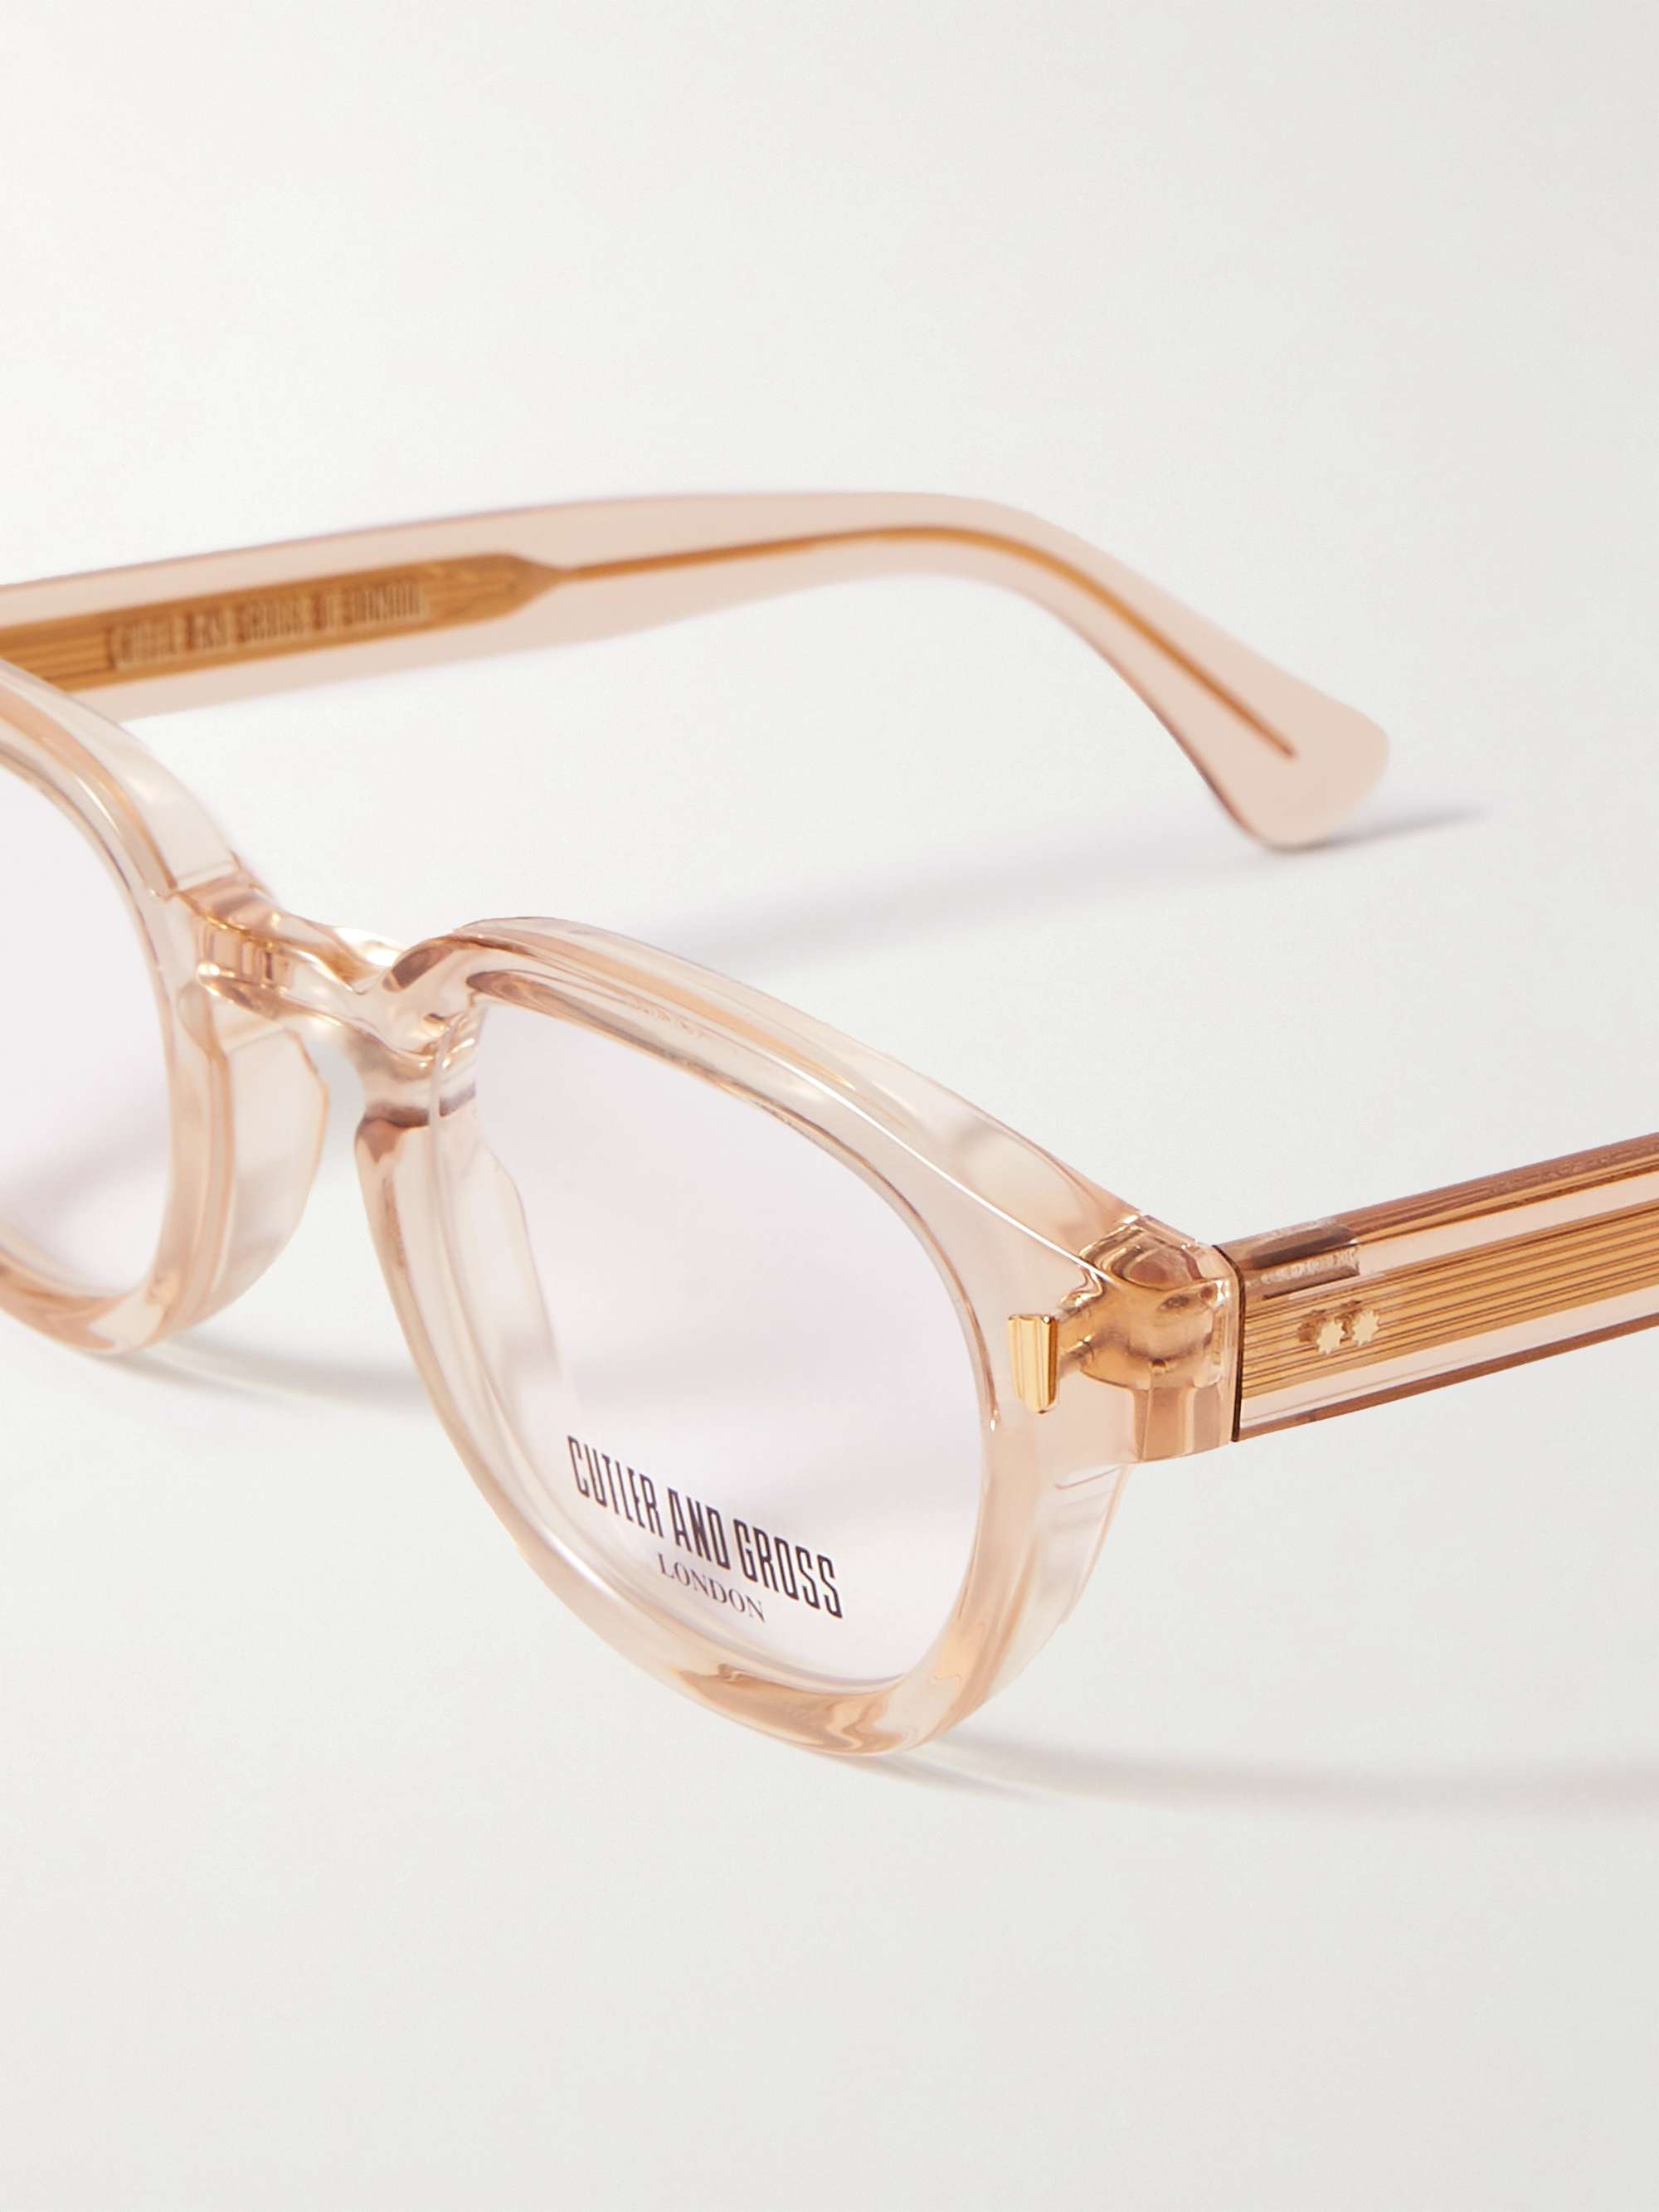 CUTLER AND GROSS 9290 Round-Frame Acetate Optical Glasses